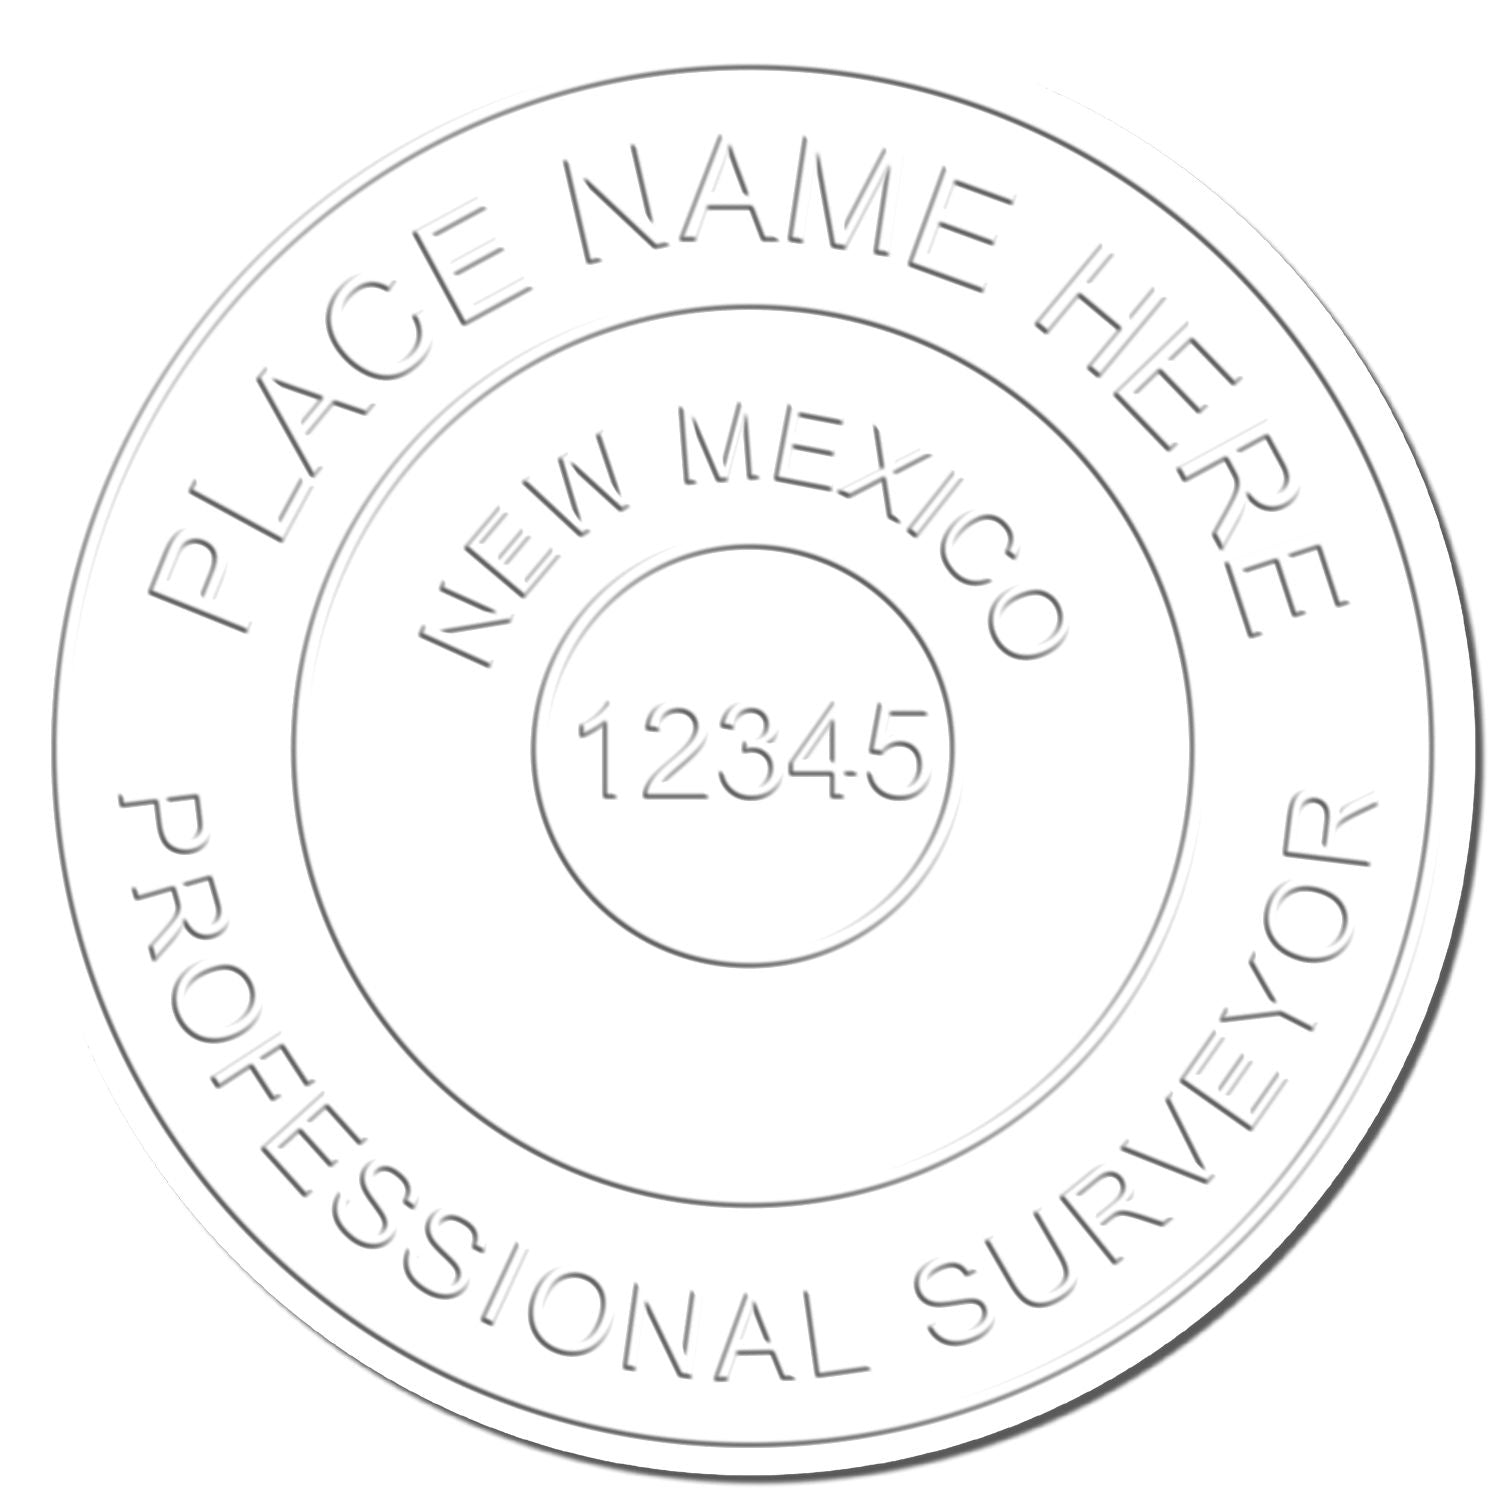 This paper is stamped with a sample imprint of the Handheld New Mexico Land Surveyor Seal, signifying its quality and reliability.